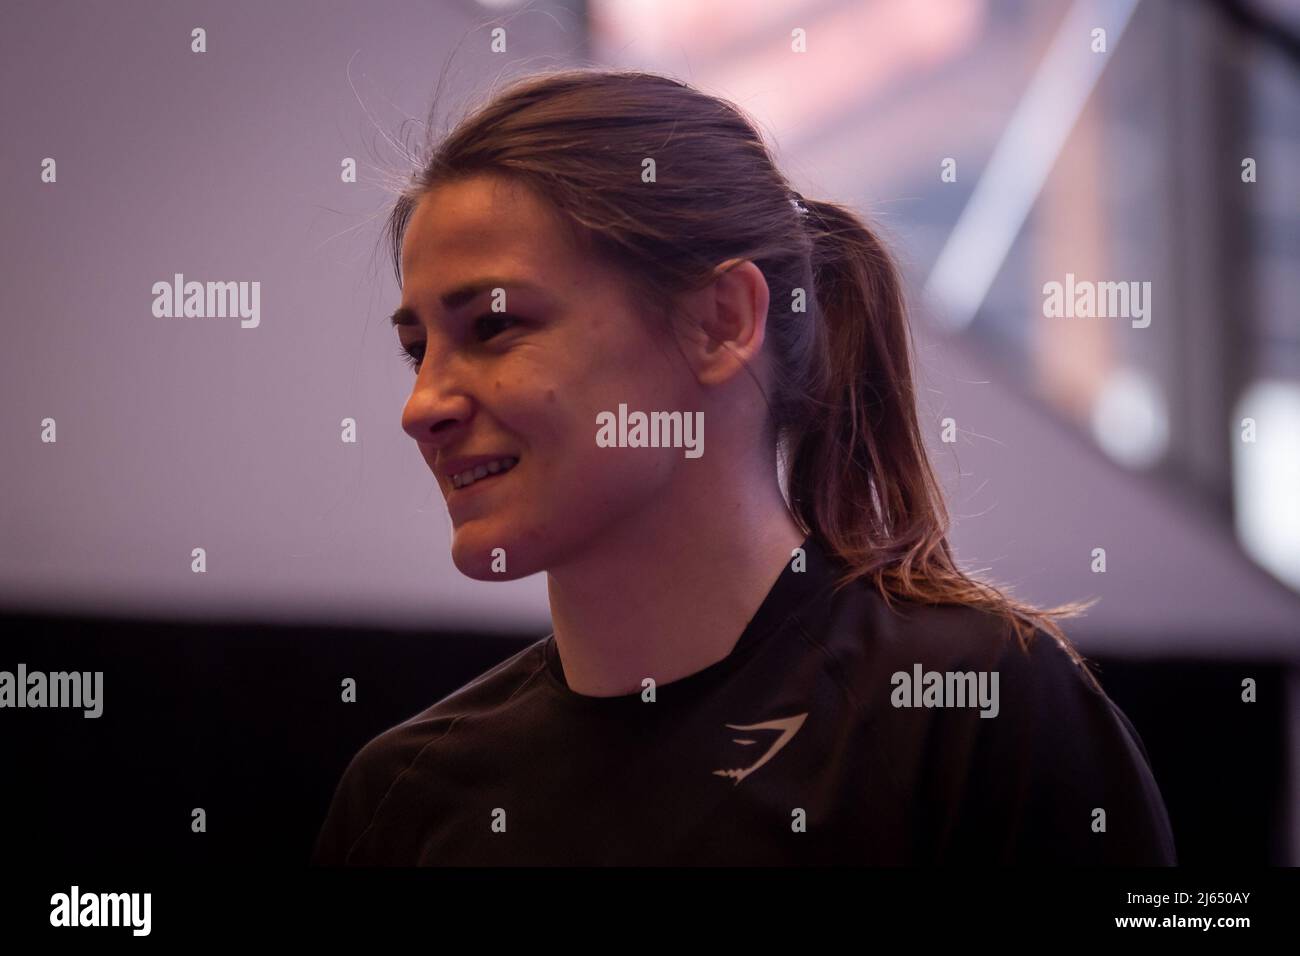 NEW YORK, NY - APRIL 27: Katie Taylor during open workouts prior to her clash with Amanda Serrano at Madison Square Garden on April 27, 2022 in New York, NY, United States. (Photo by Matt Davies/PxImages) Credit: Px Images/Alamy Live News Stock Photo